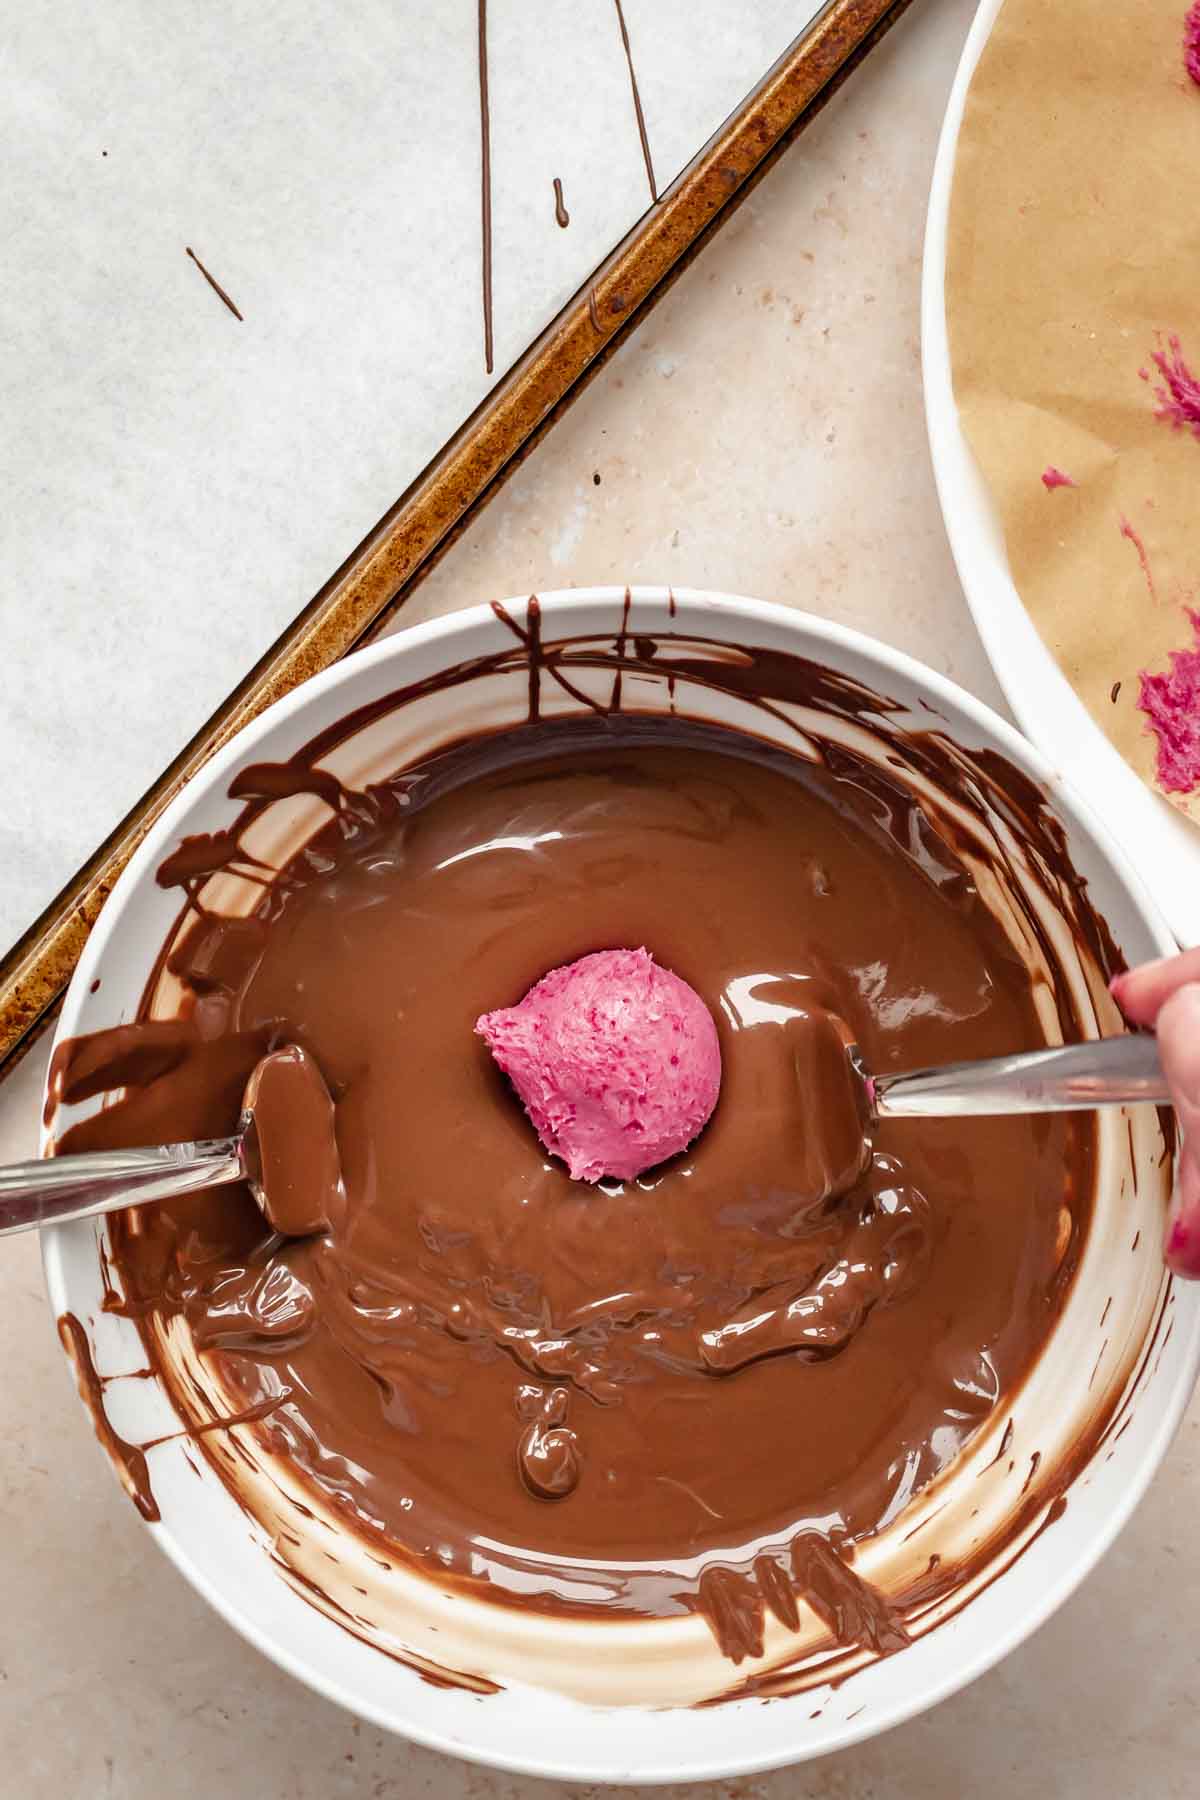 A truffle in a bowl of melted chocolate with two forks underneath.